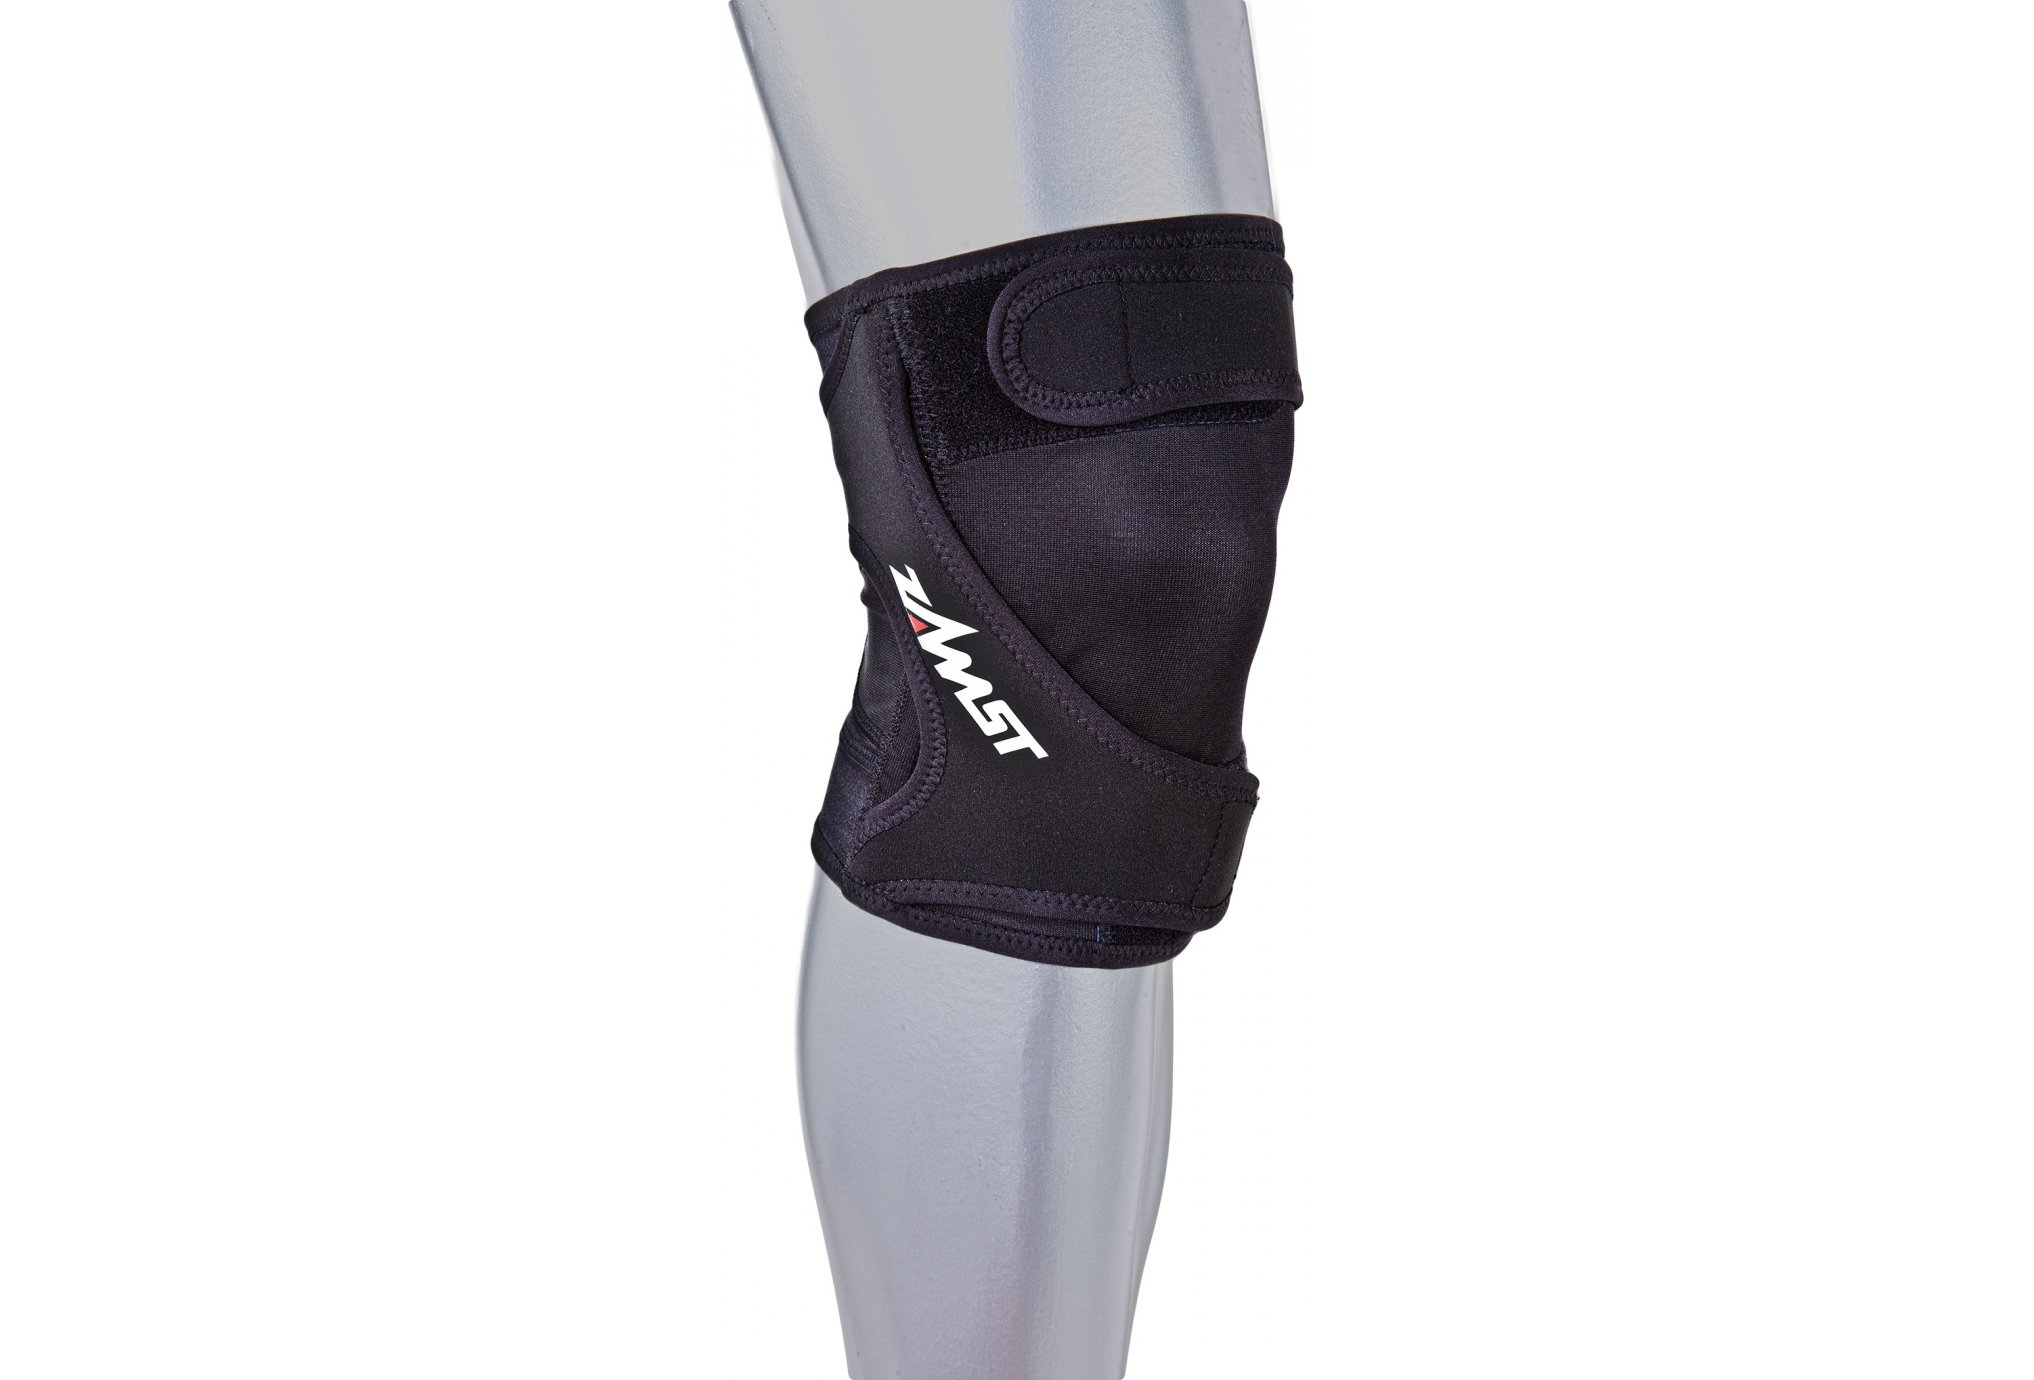 Zamst Genouillre tfl rk-1 droite protection musculaire & articulaire